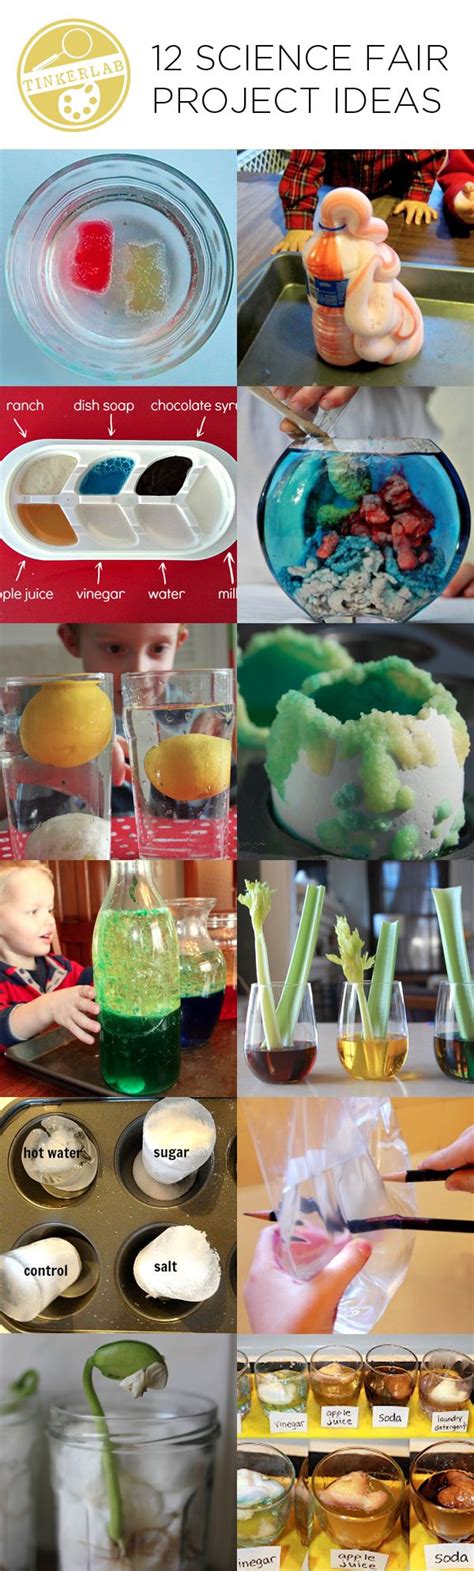 science images  pinterest day care teaching science